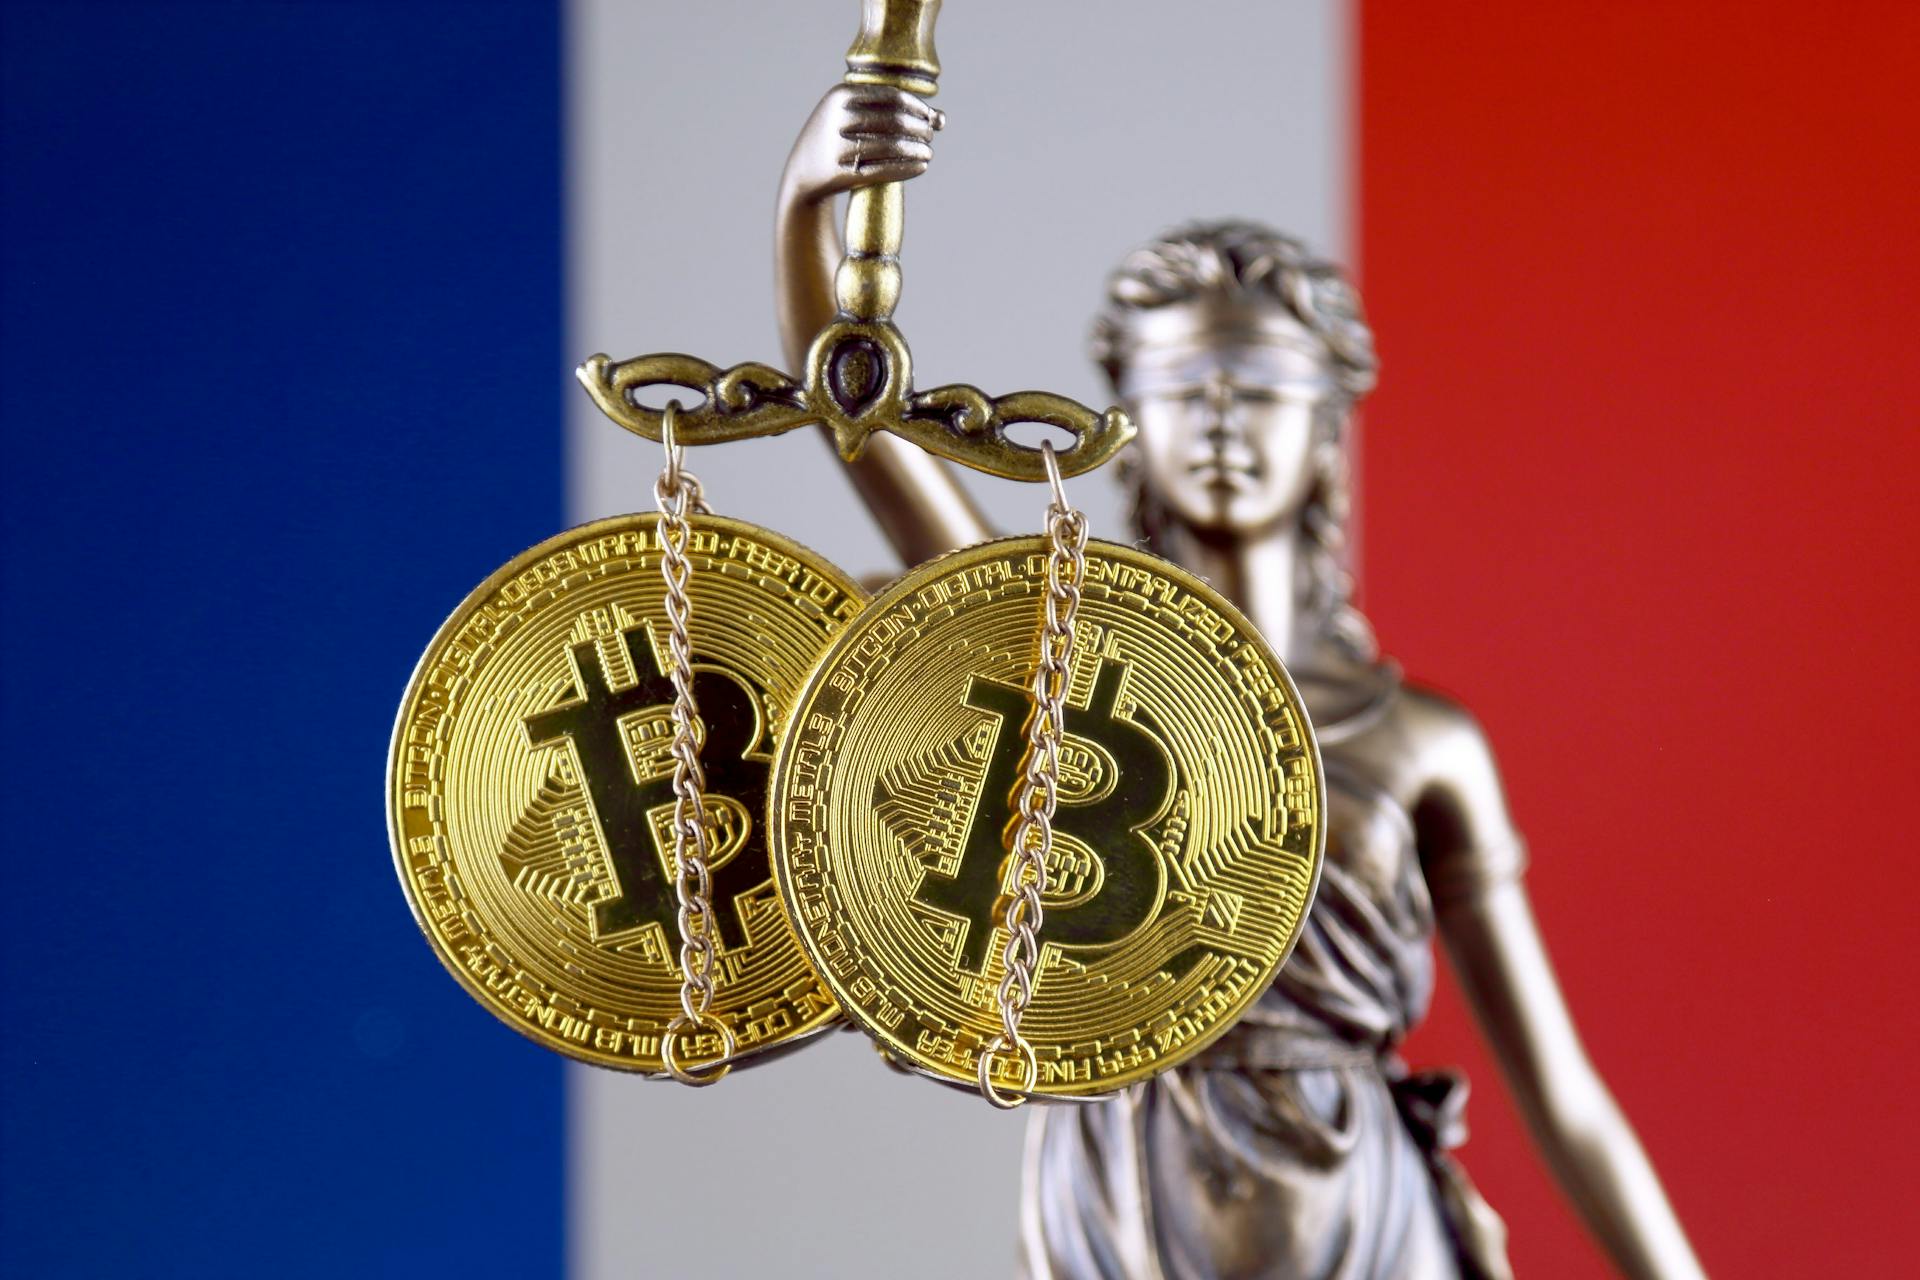 France's PACTE law enhances legal certainty and the access of crypto players to banking services.